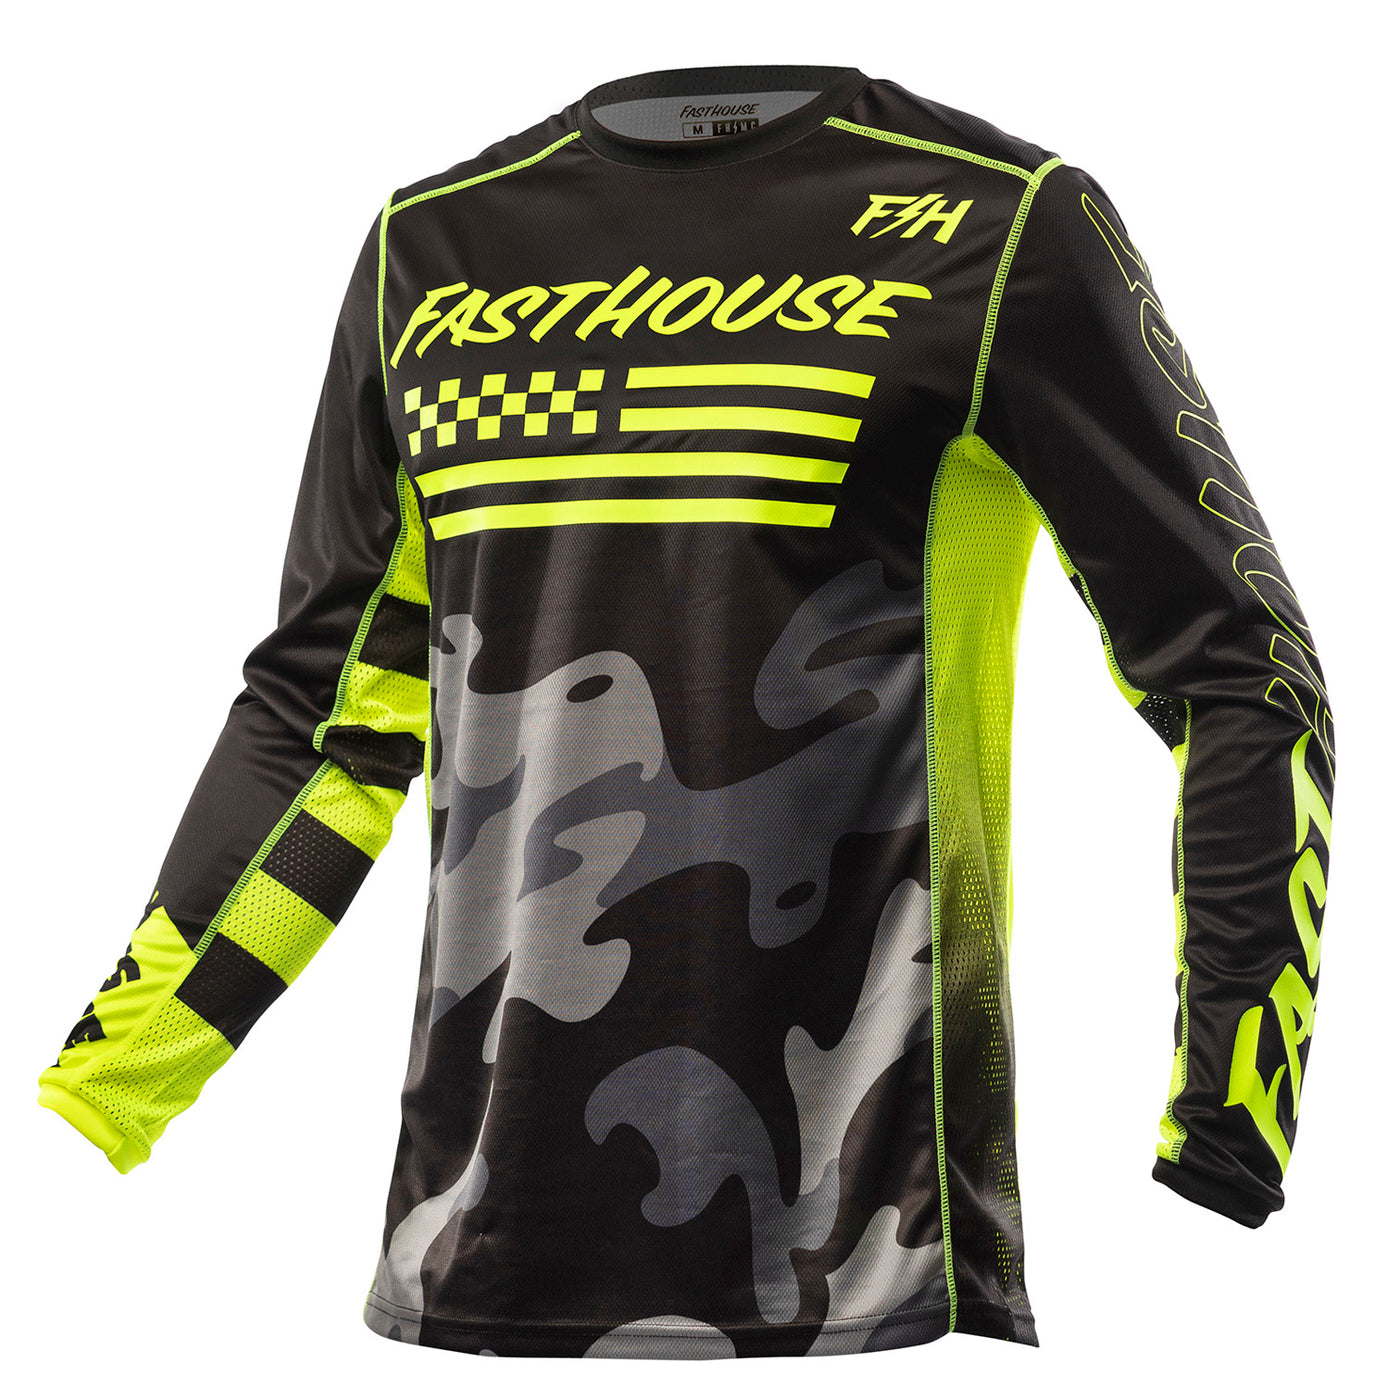 Fasthouse Grindhouse Riot Jersey